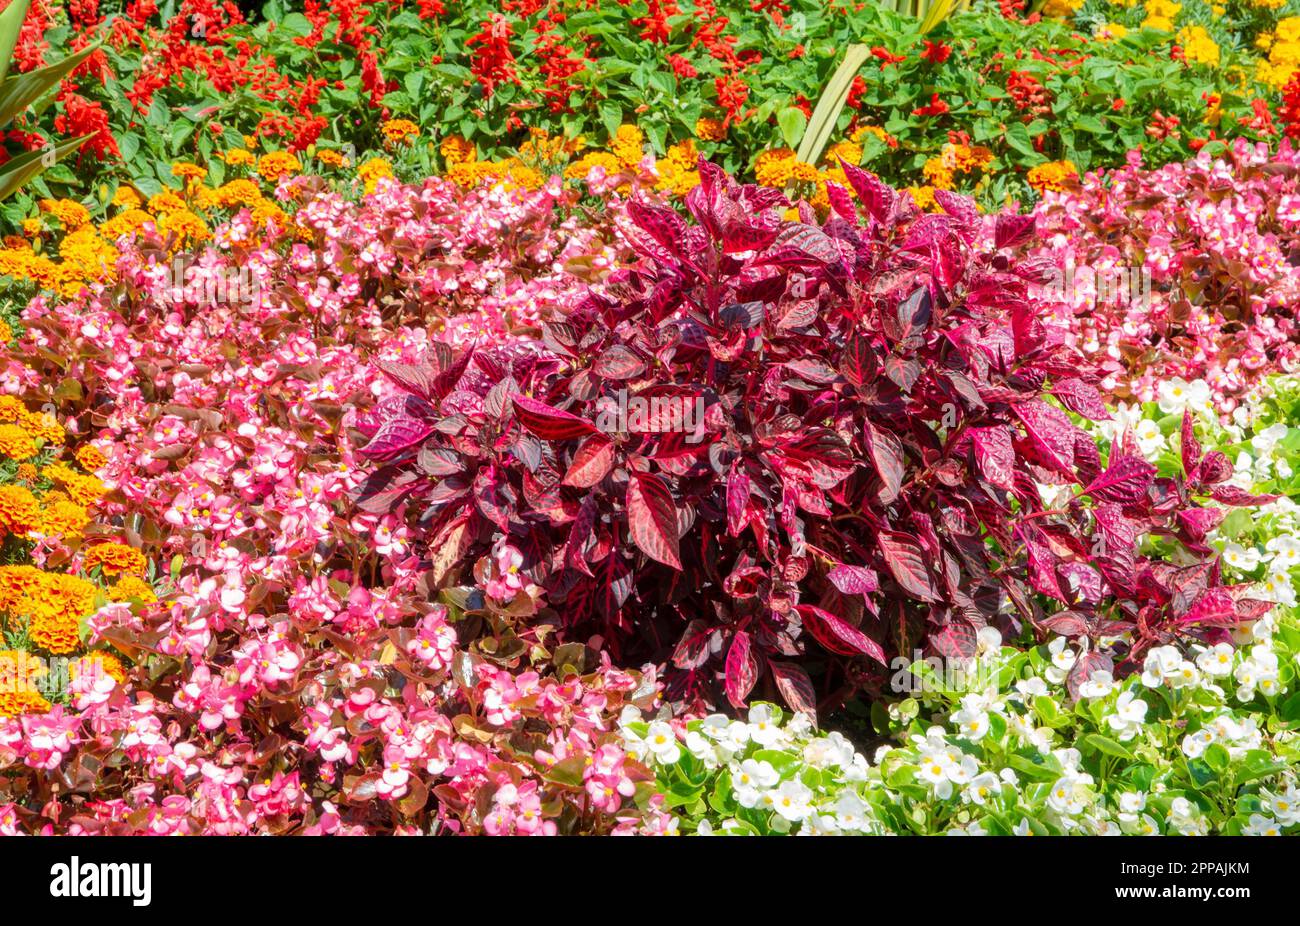 Flowerbed in the garden with various flowers Stock Photo